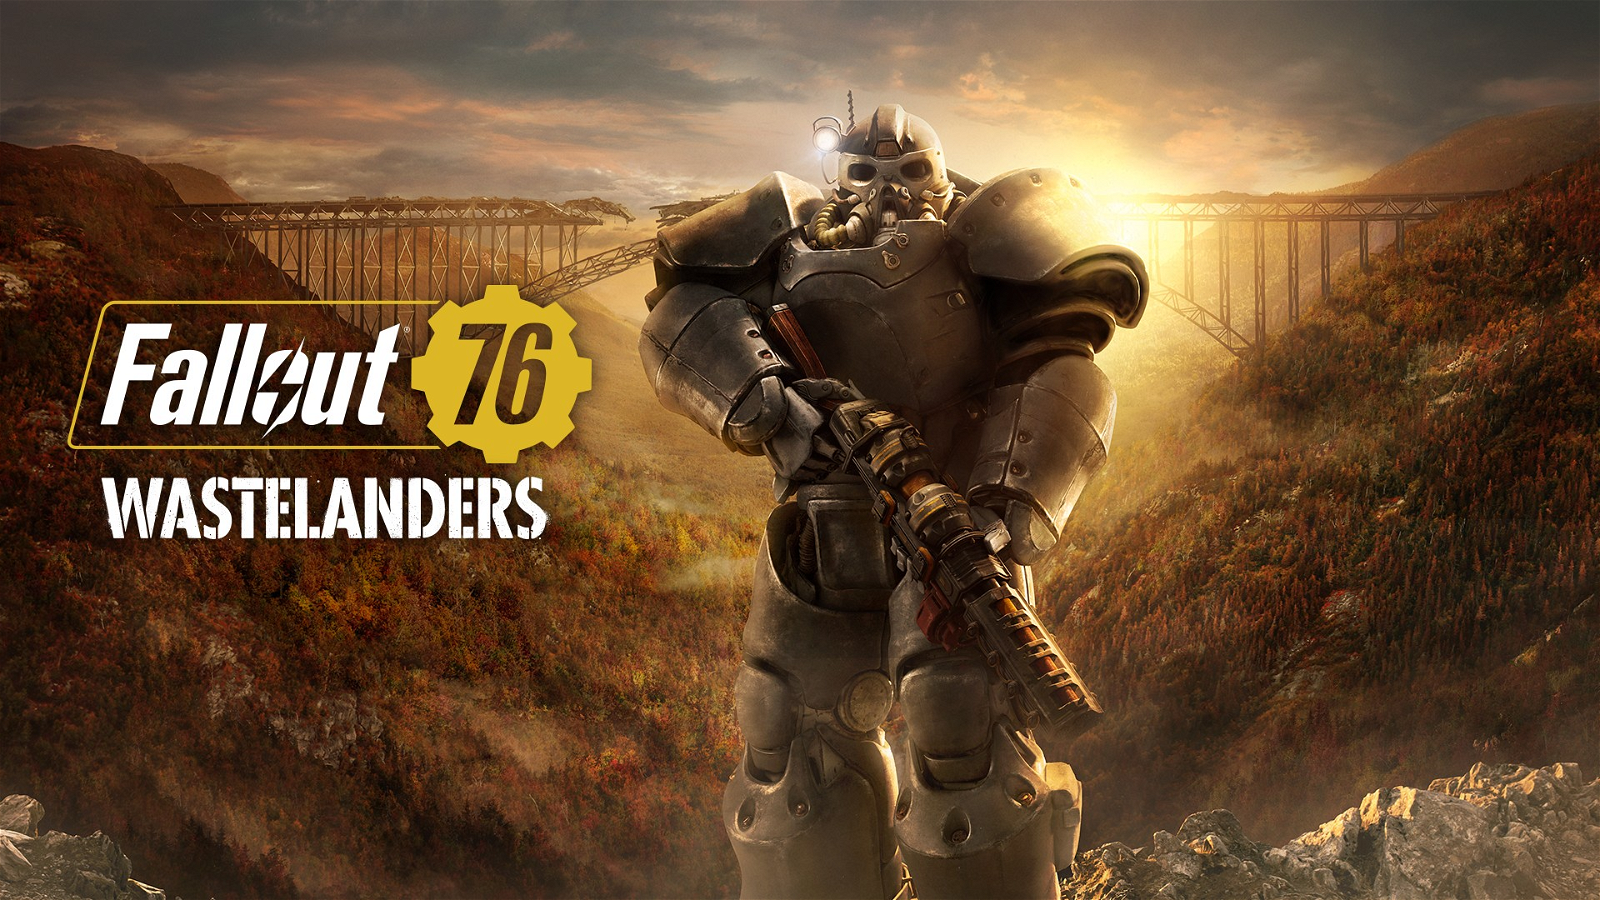 Promotional for Fallout 76